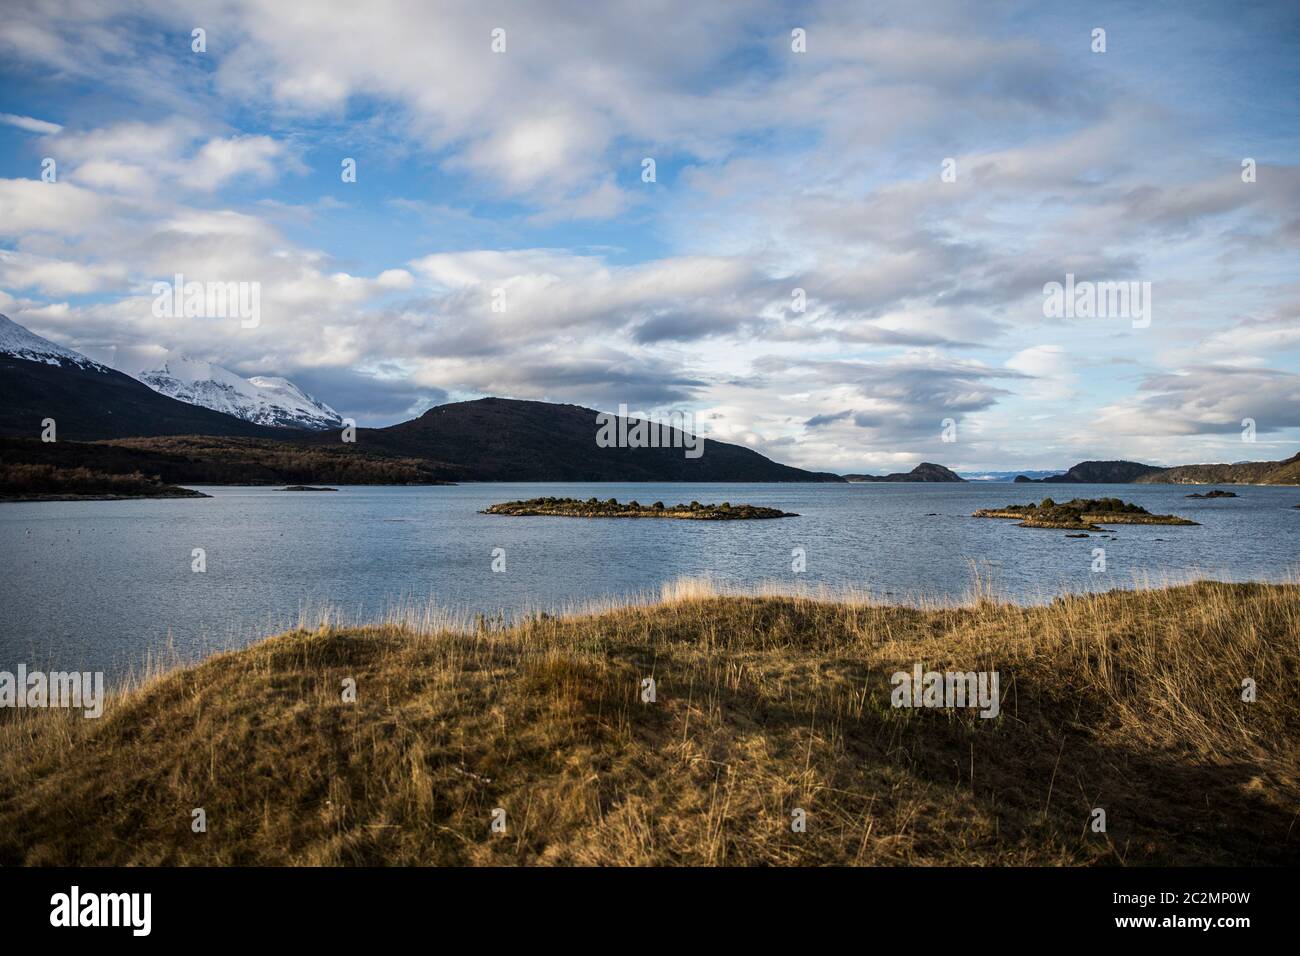 landscape of the ocean with a mountain range in the background Stock Photo